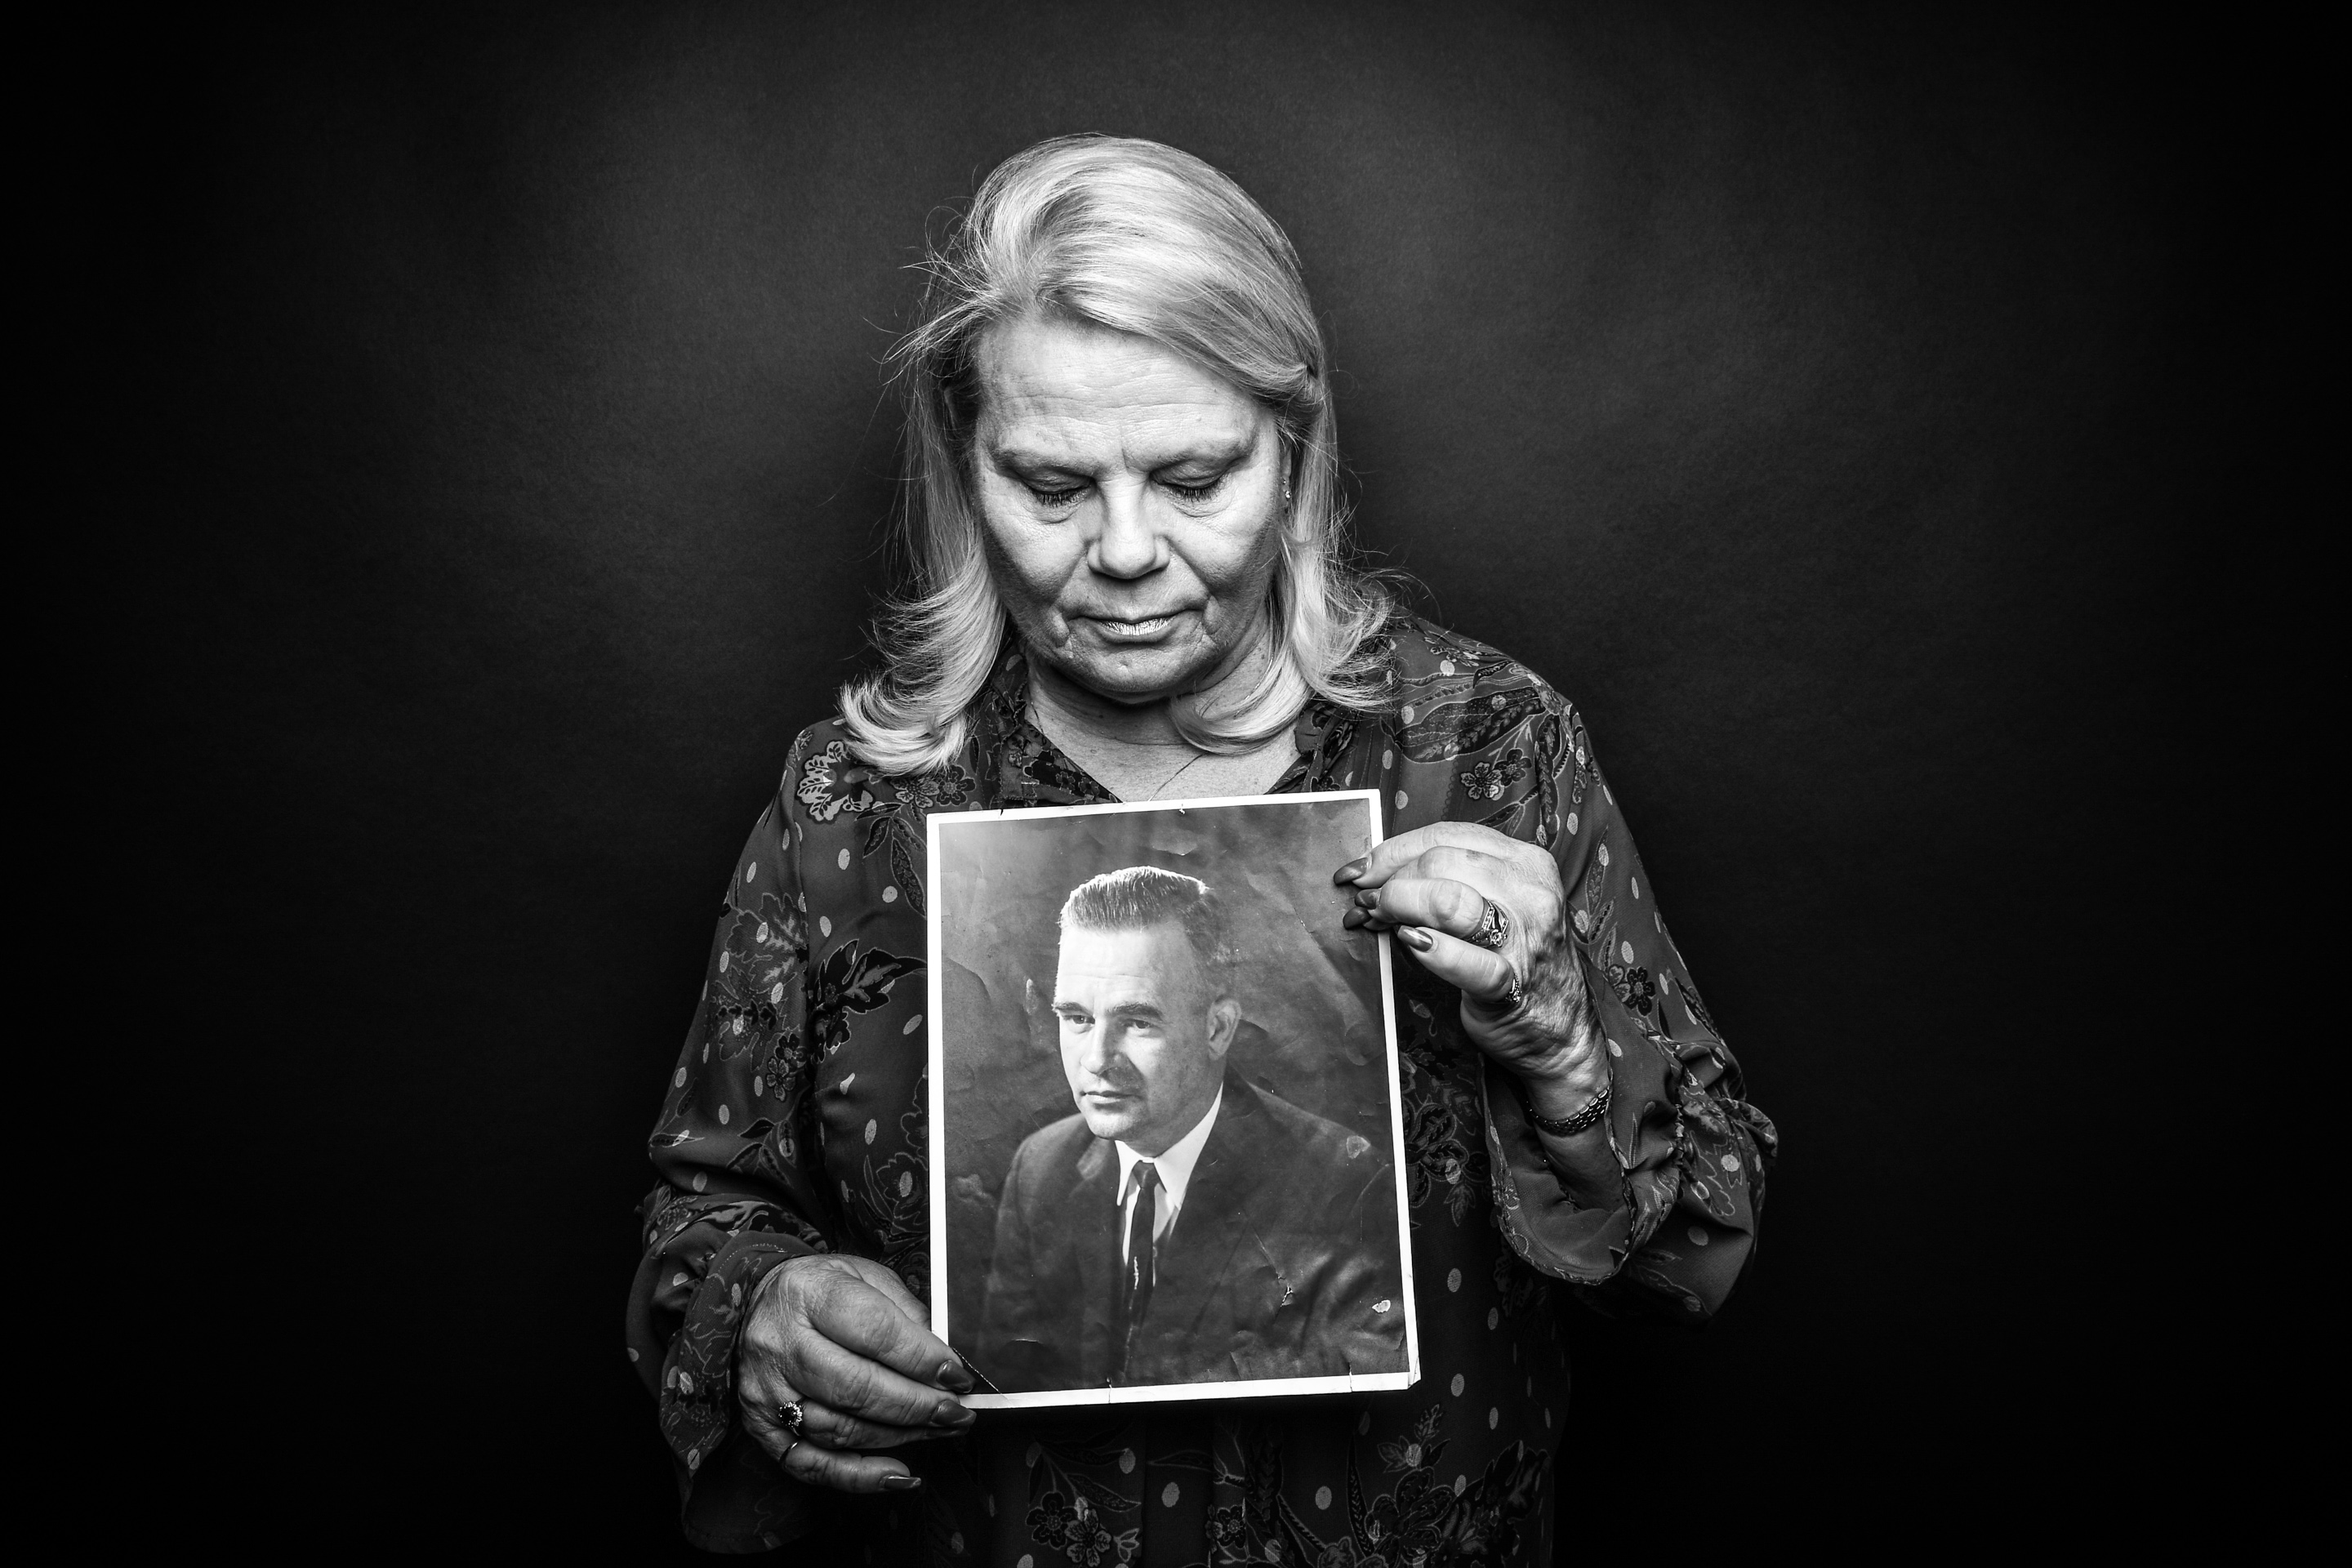 Gaelene Rosinski, Moline, holds a photo of her father, Keith Lane, who died by suicide at 52, in 1975.